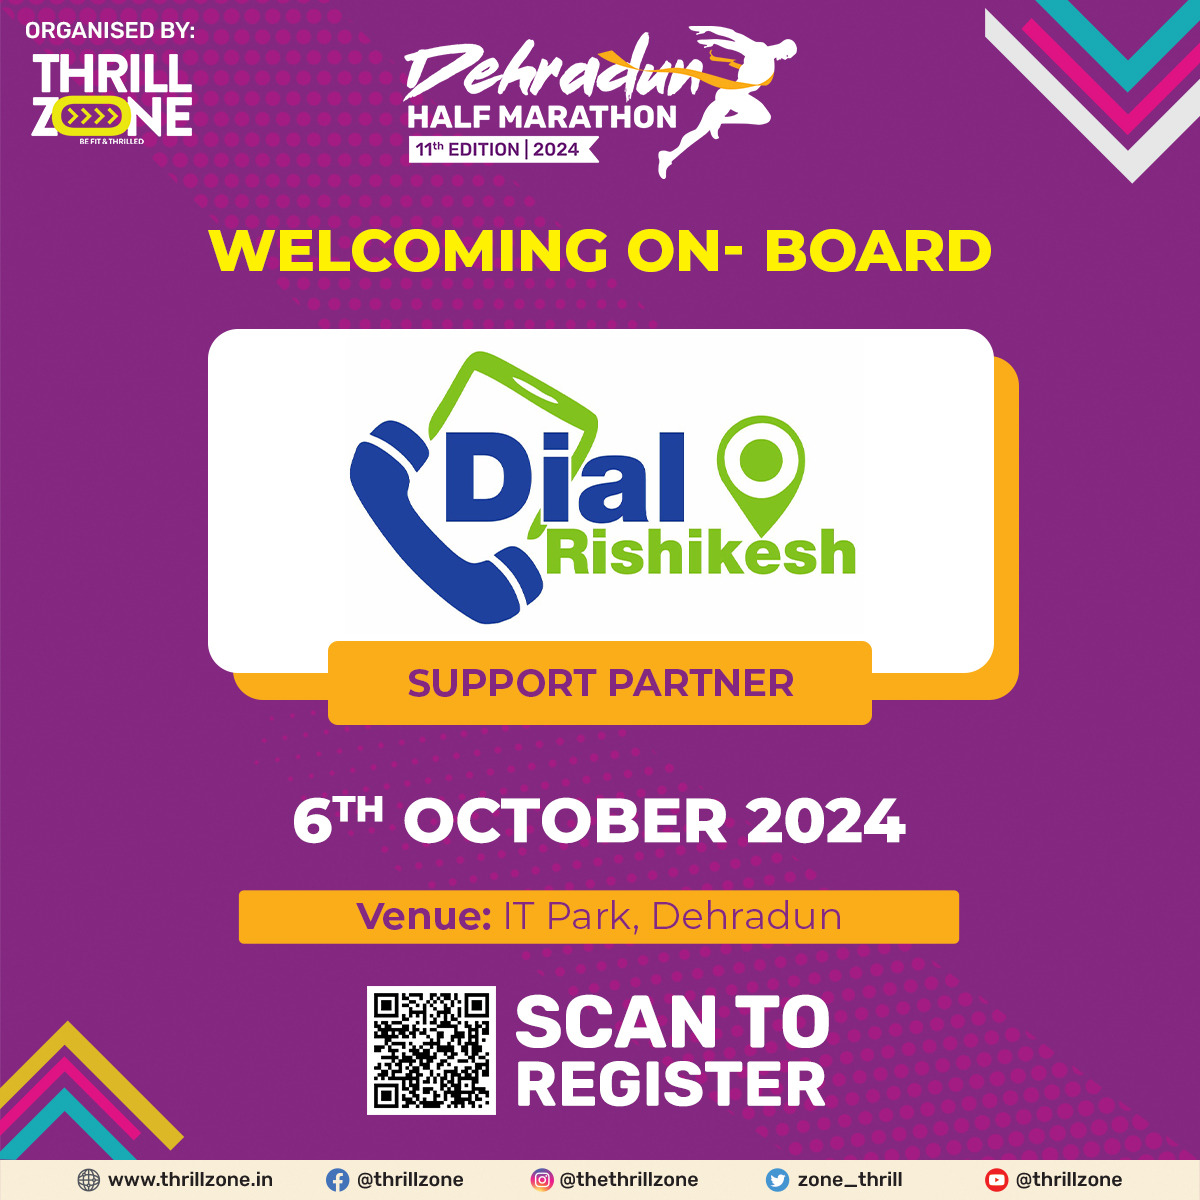 We are delighted to announce Dial Rishikesh as Support partner at Dehradun Half Marathon 2024 (11th Edition) to be held on 6th October at IT Park, Dehradun.

For more information visit thrillzone.in 

#thrillzone #dialrishikesh #derhadunhalfmarathon #dehradunrunnersclub